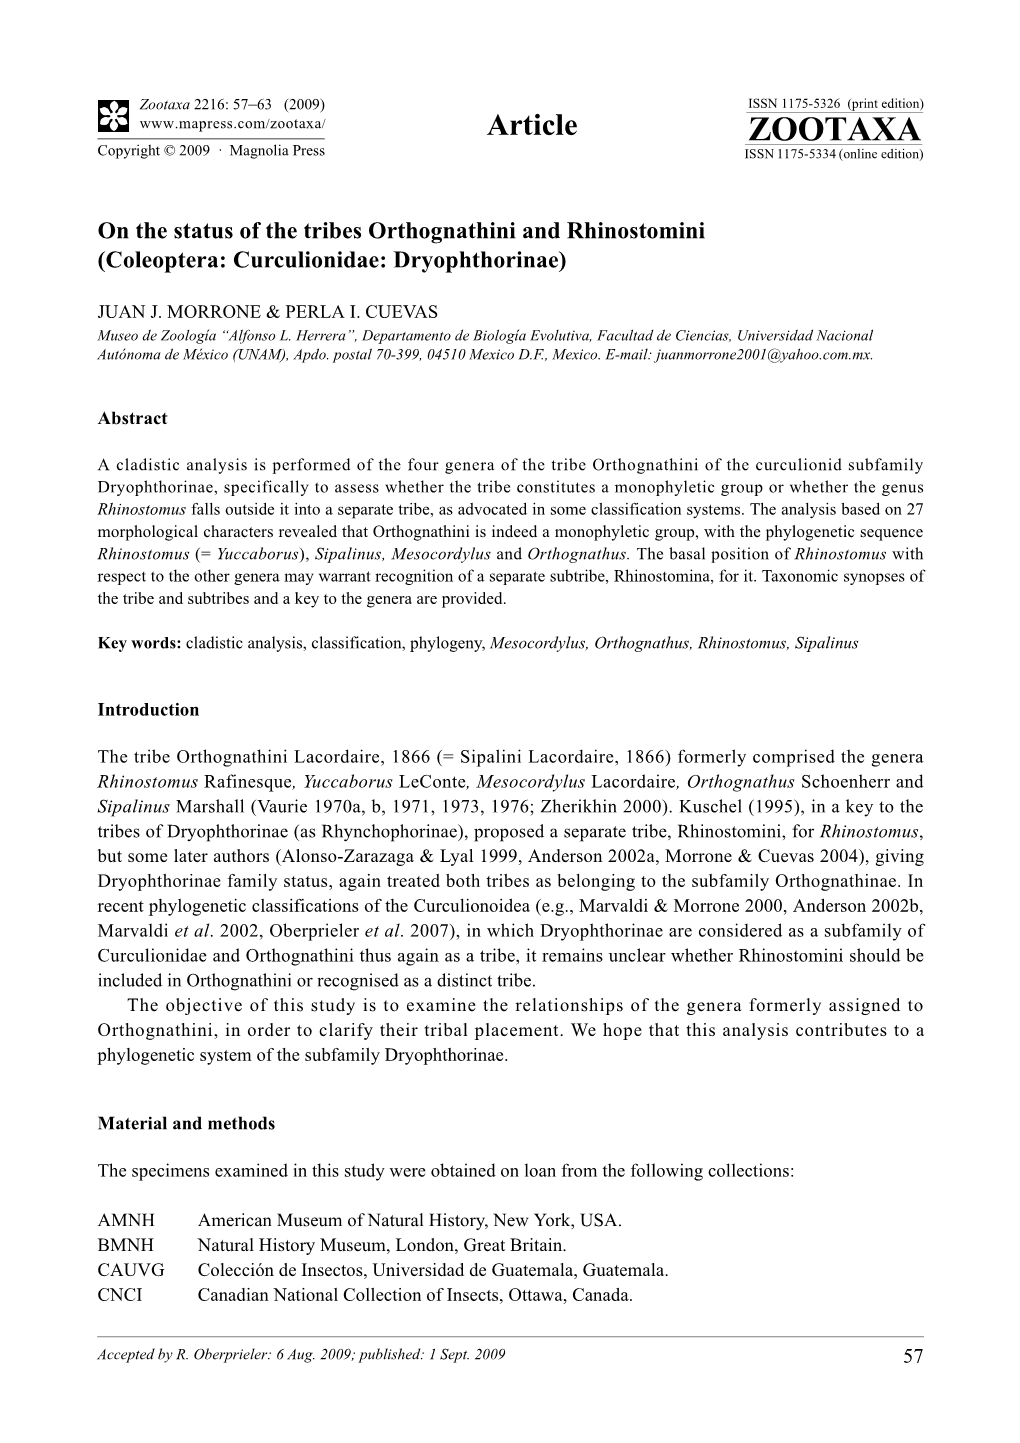 Zootaxa, on the Status of the Tribes Orthognathini And